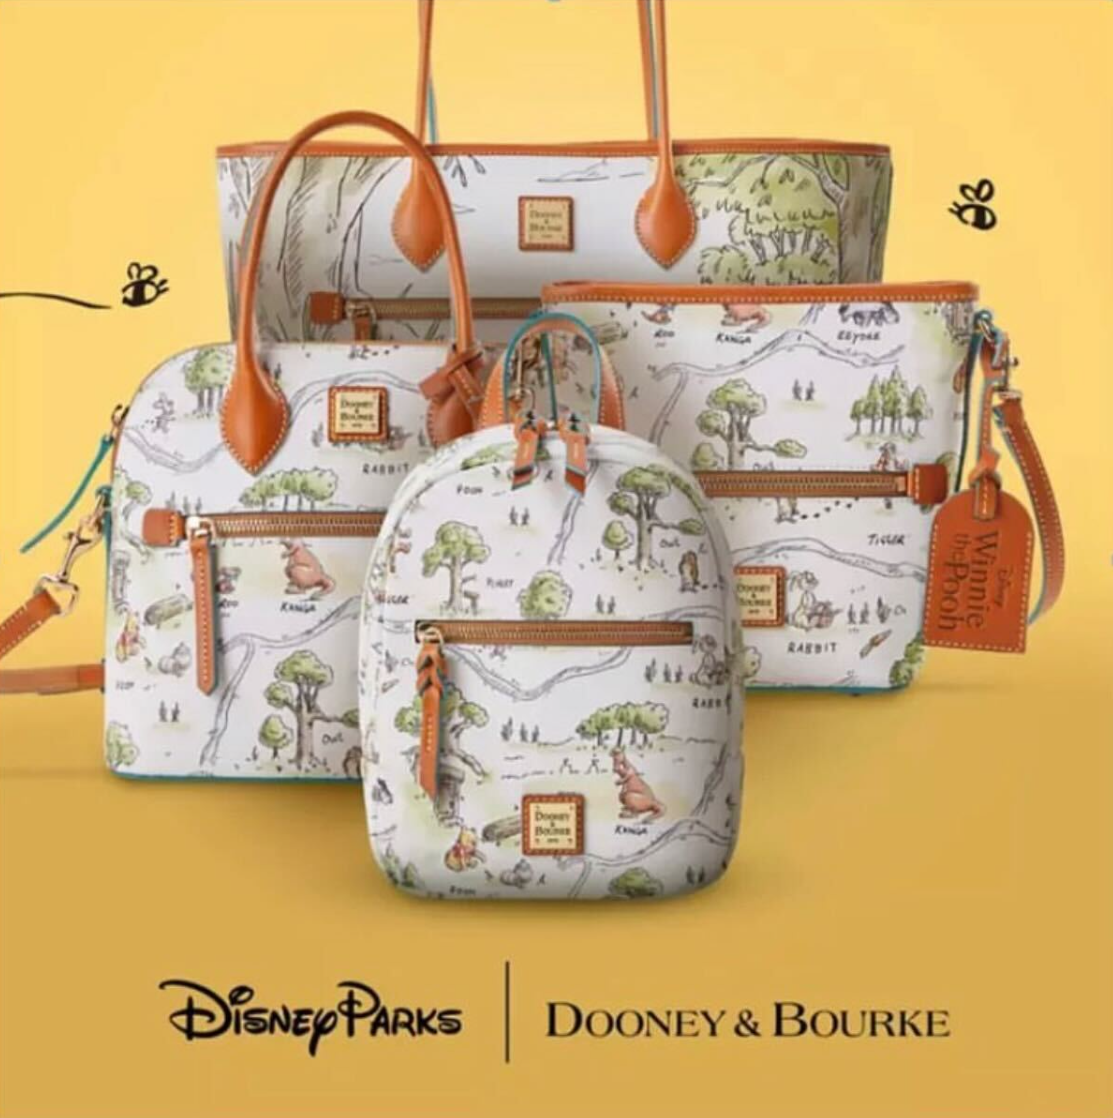 Coming Soon: New Winnie the Pooh Dooney & Bourke collection